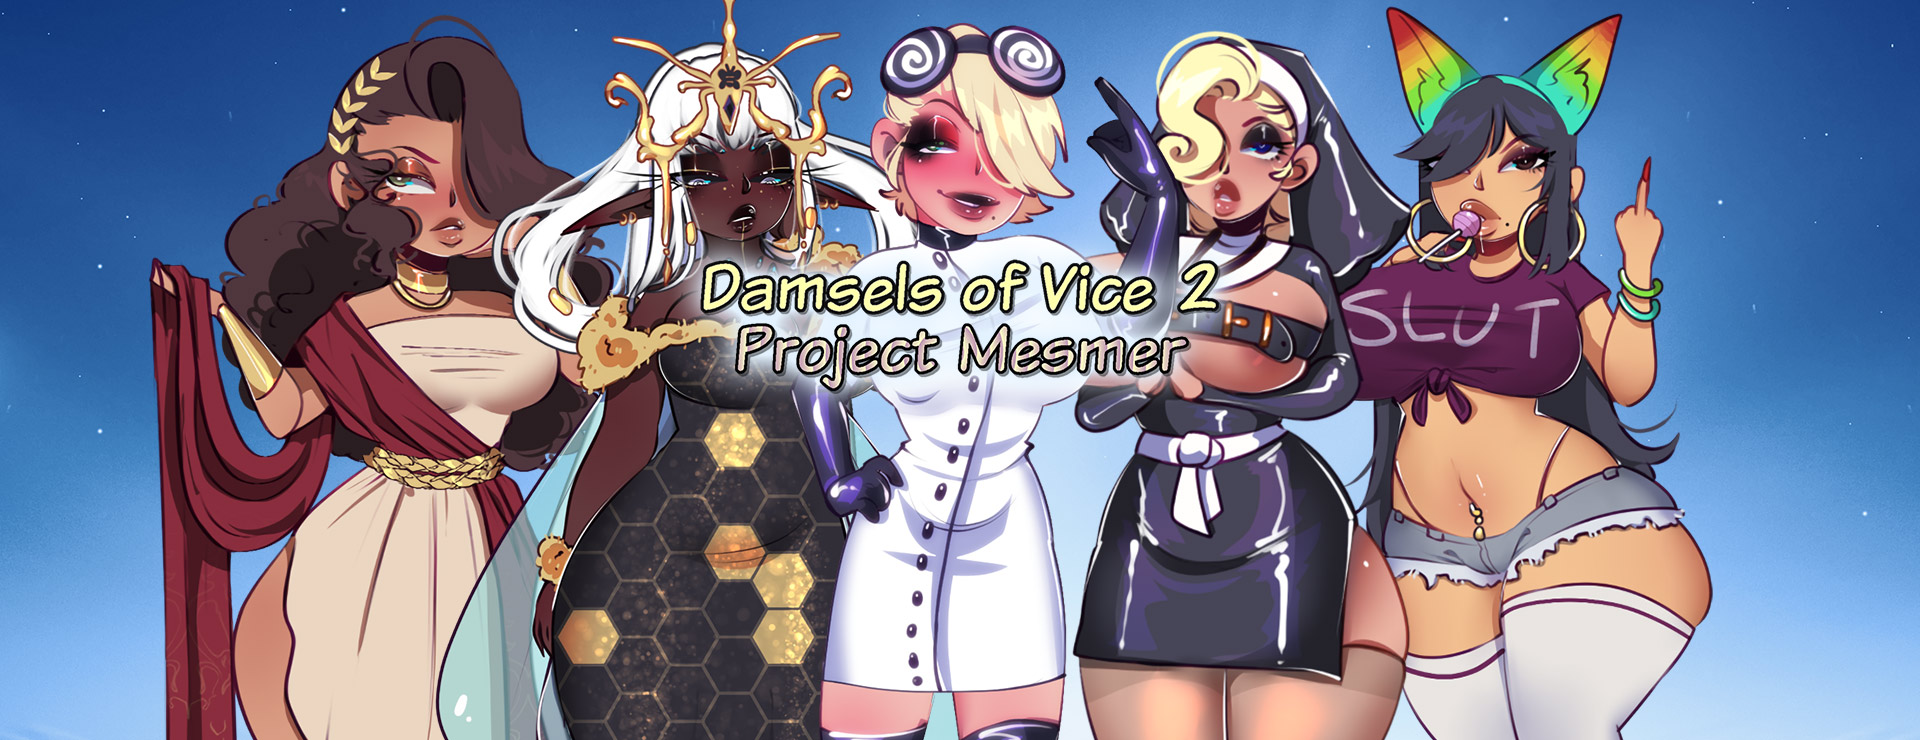 Damsels of Vice 2: Project Mesmer - RPG Game